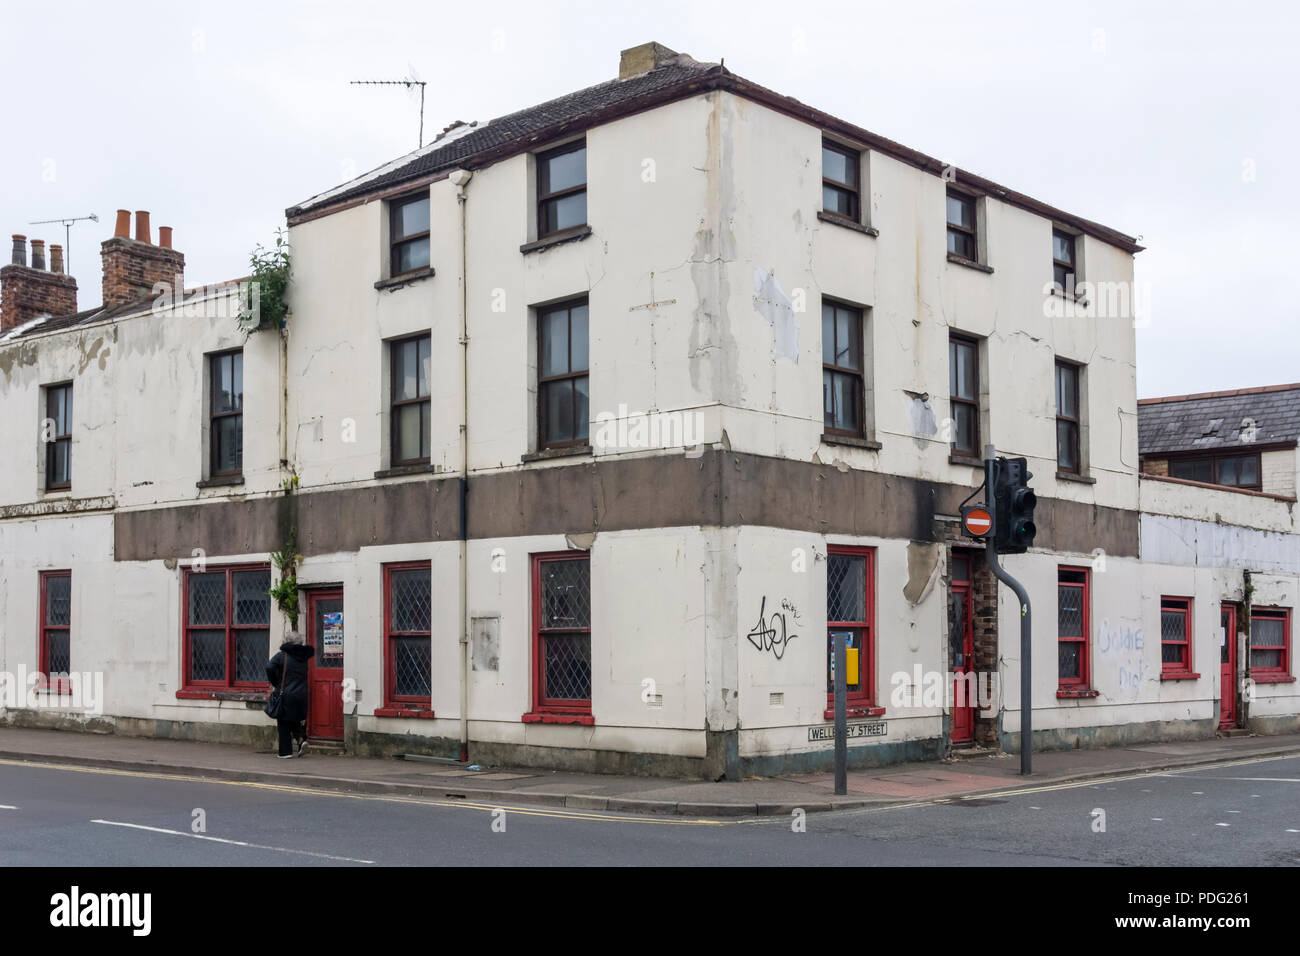 Closed & semi-derelict Glendevon Hotel in King's Lynn. King's Lynn is one of the towns eligible for support from the new government Towns Fund. Stock Photo